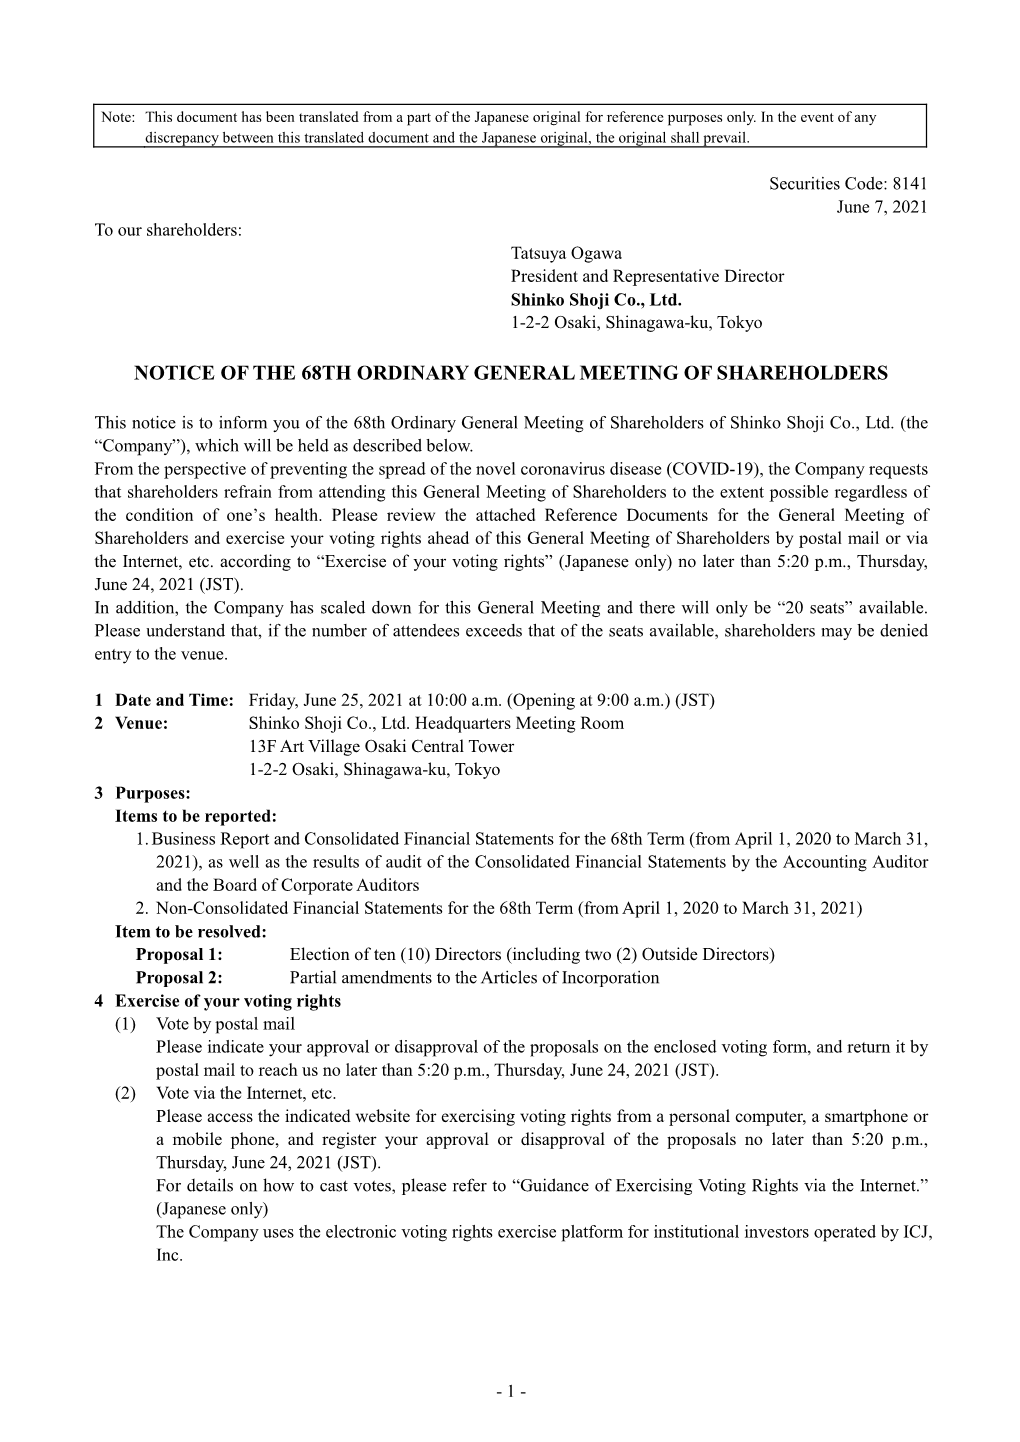 Notice of the 68Th Ordinary General Meeting of Shareholders